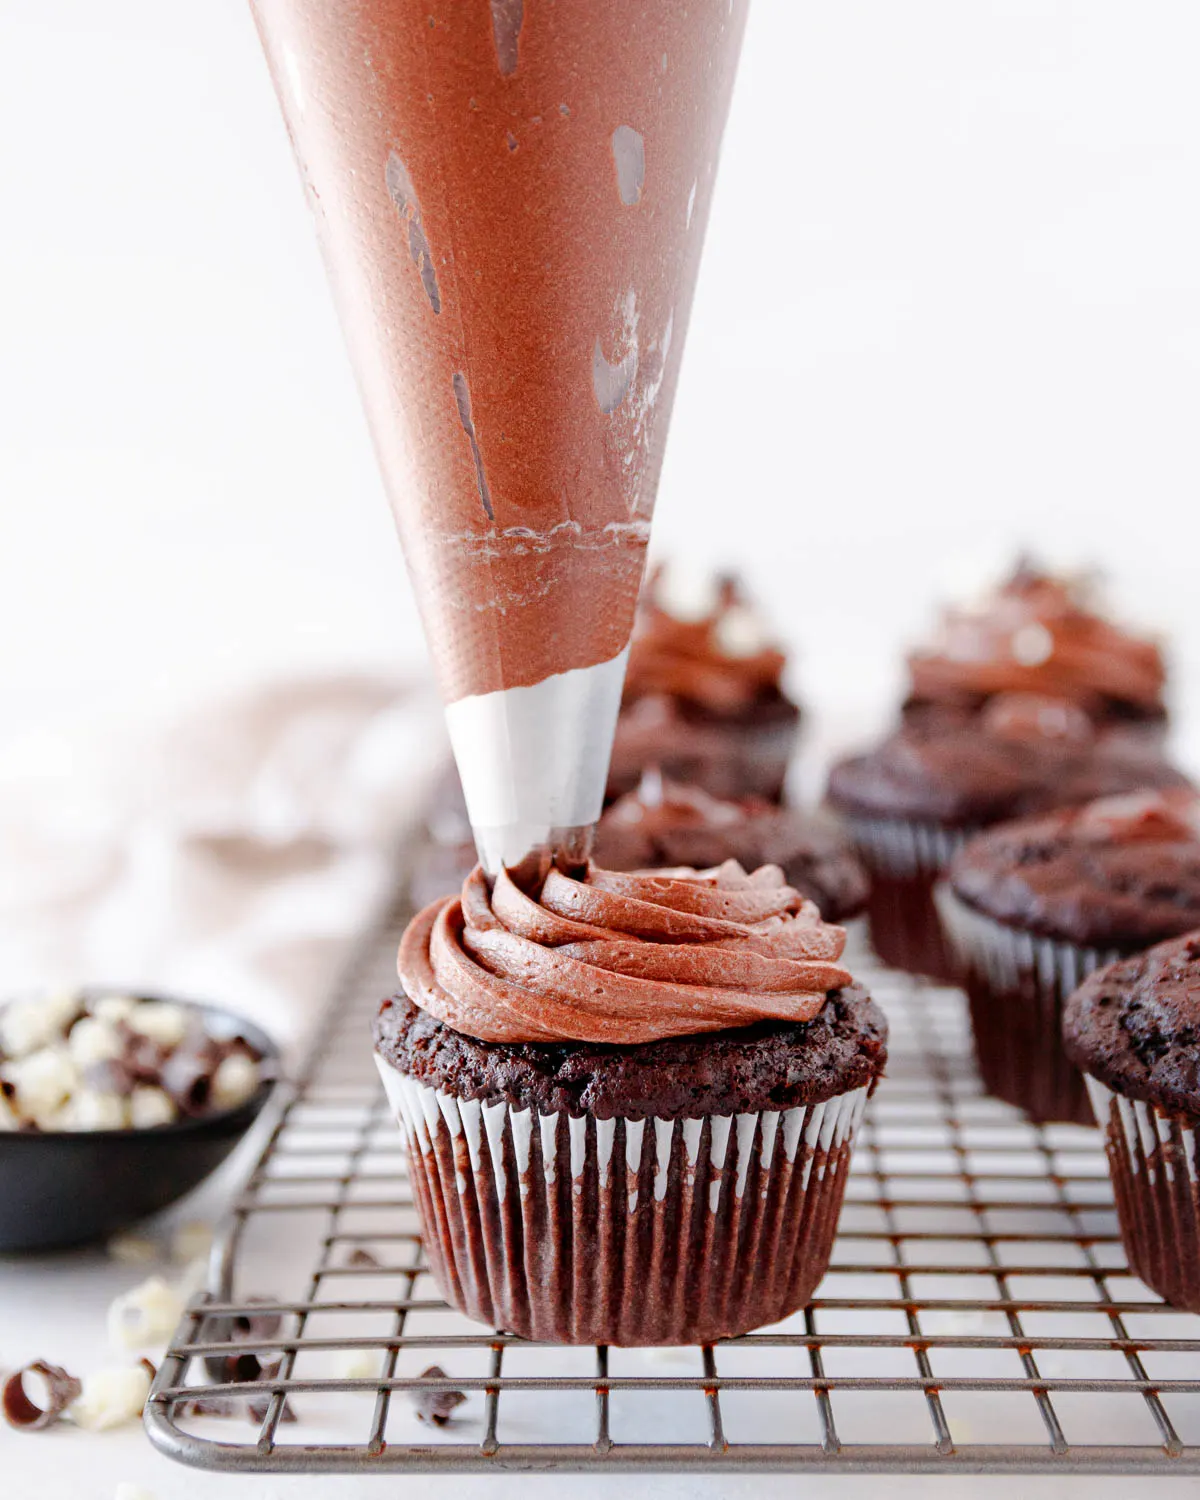 Piping bag swirling fudge frosting over a cupcake